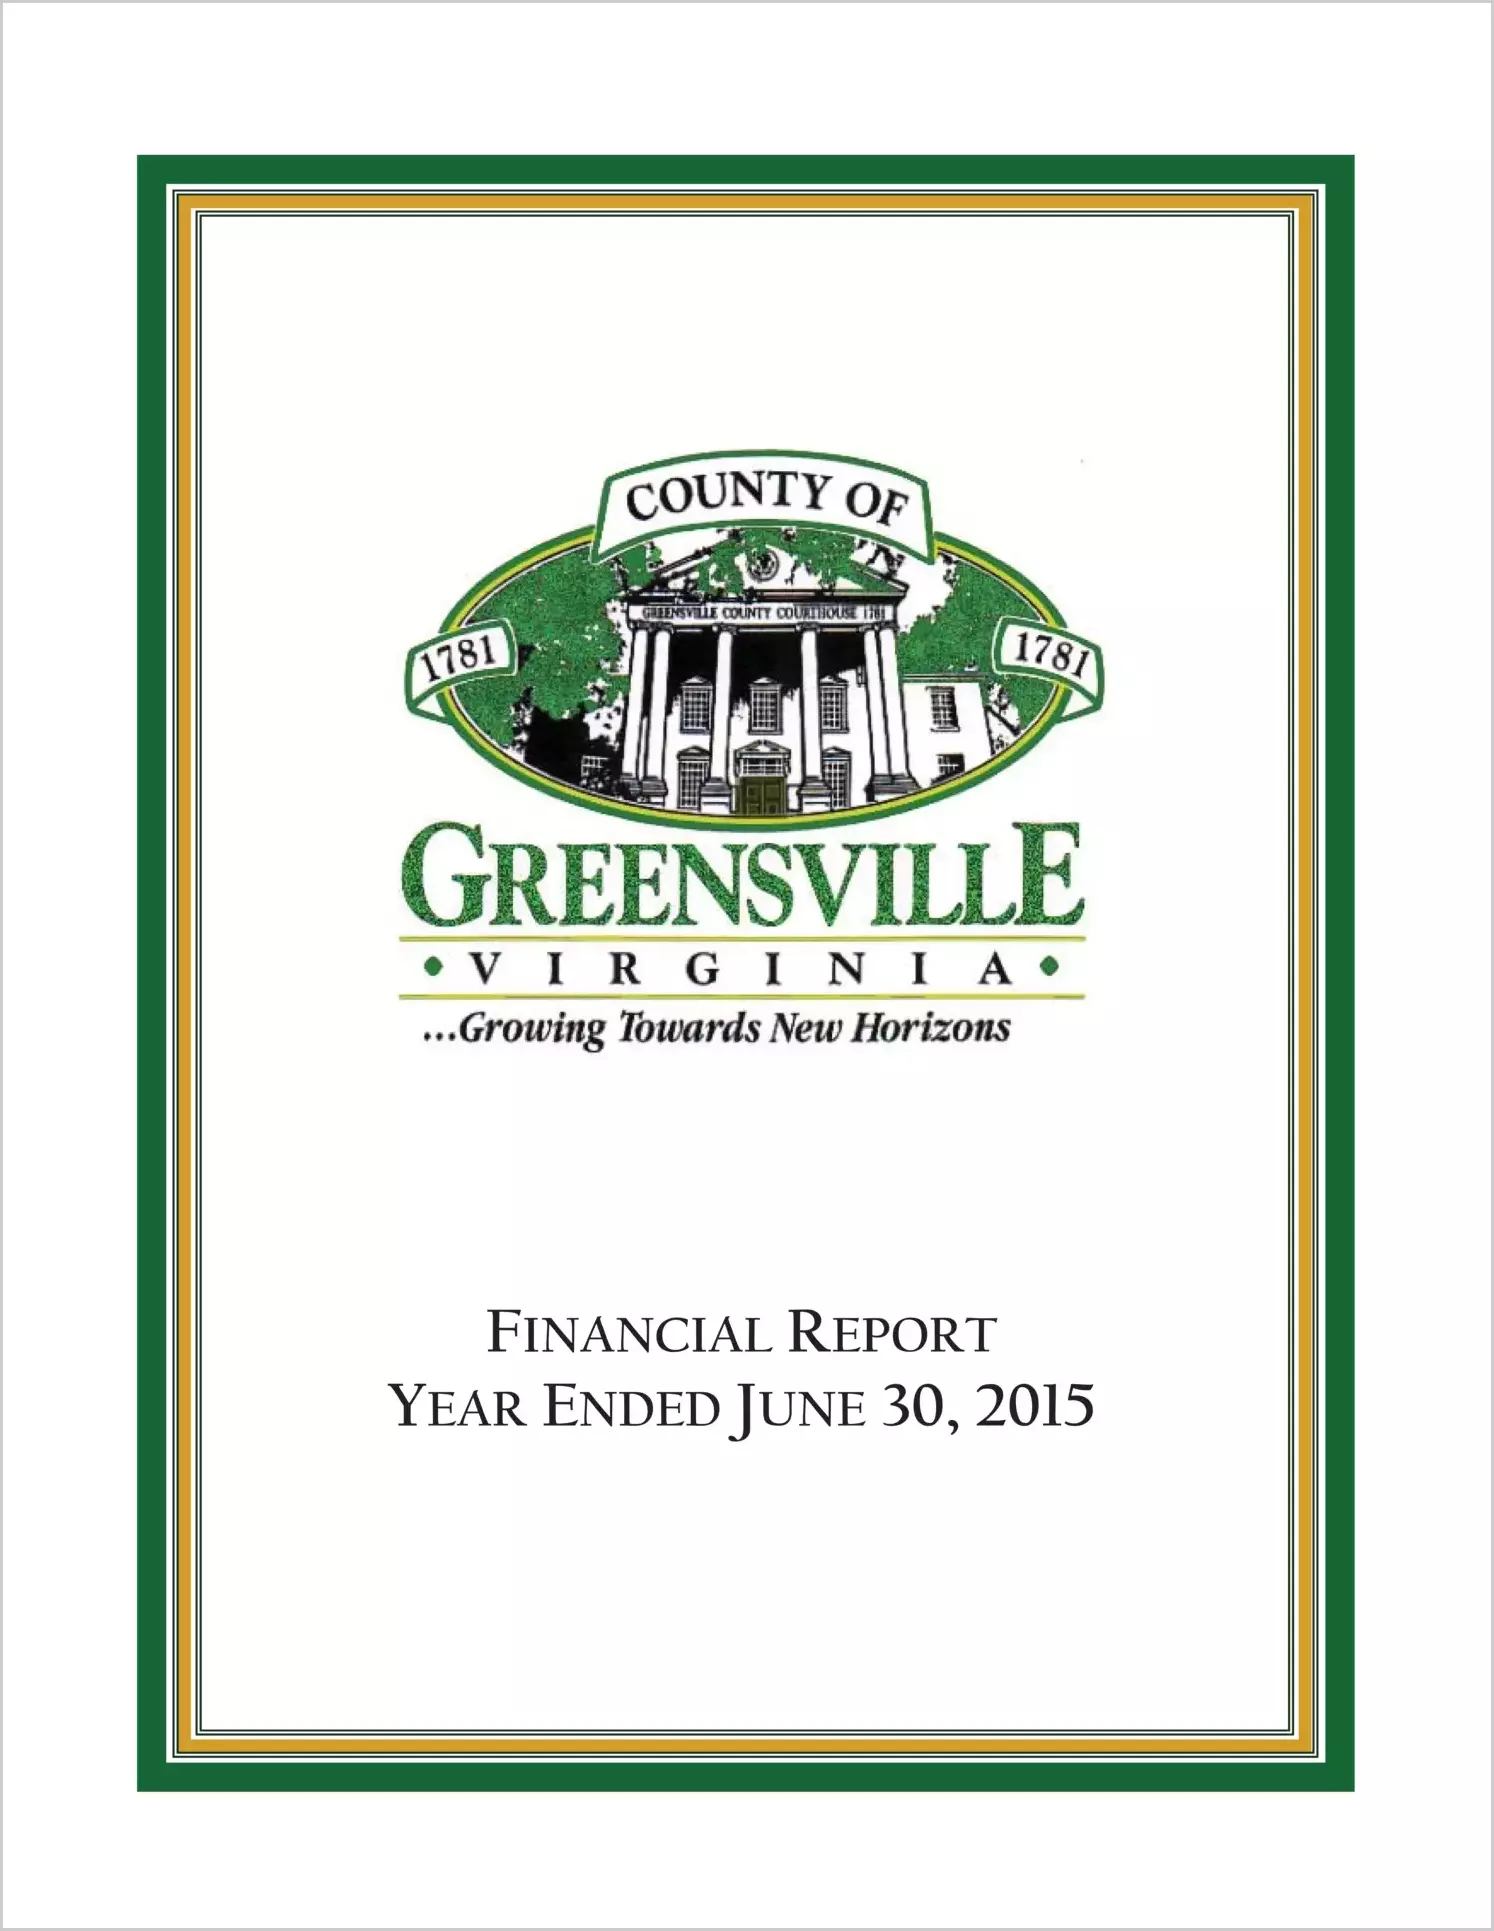 2015 Annual Financial Report for County of Greensville